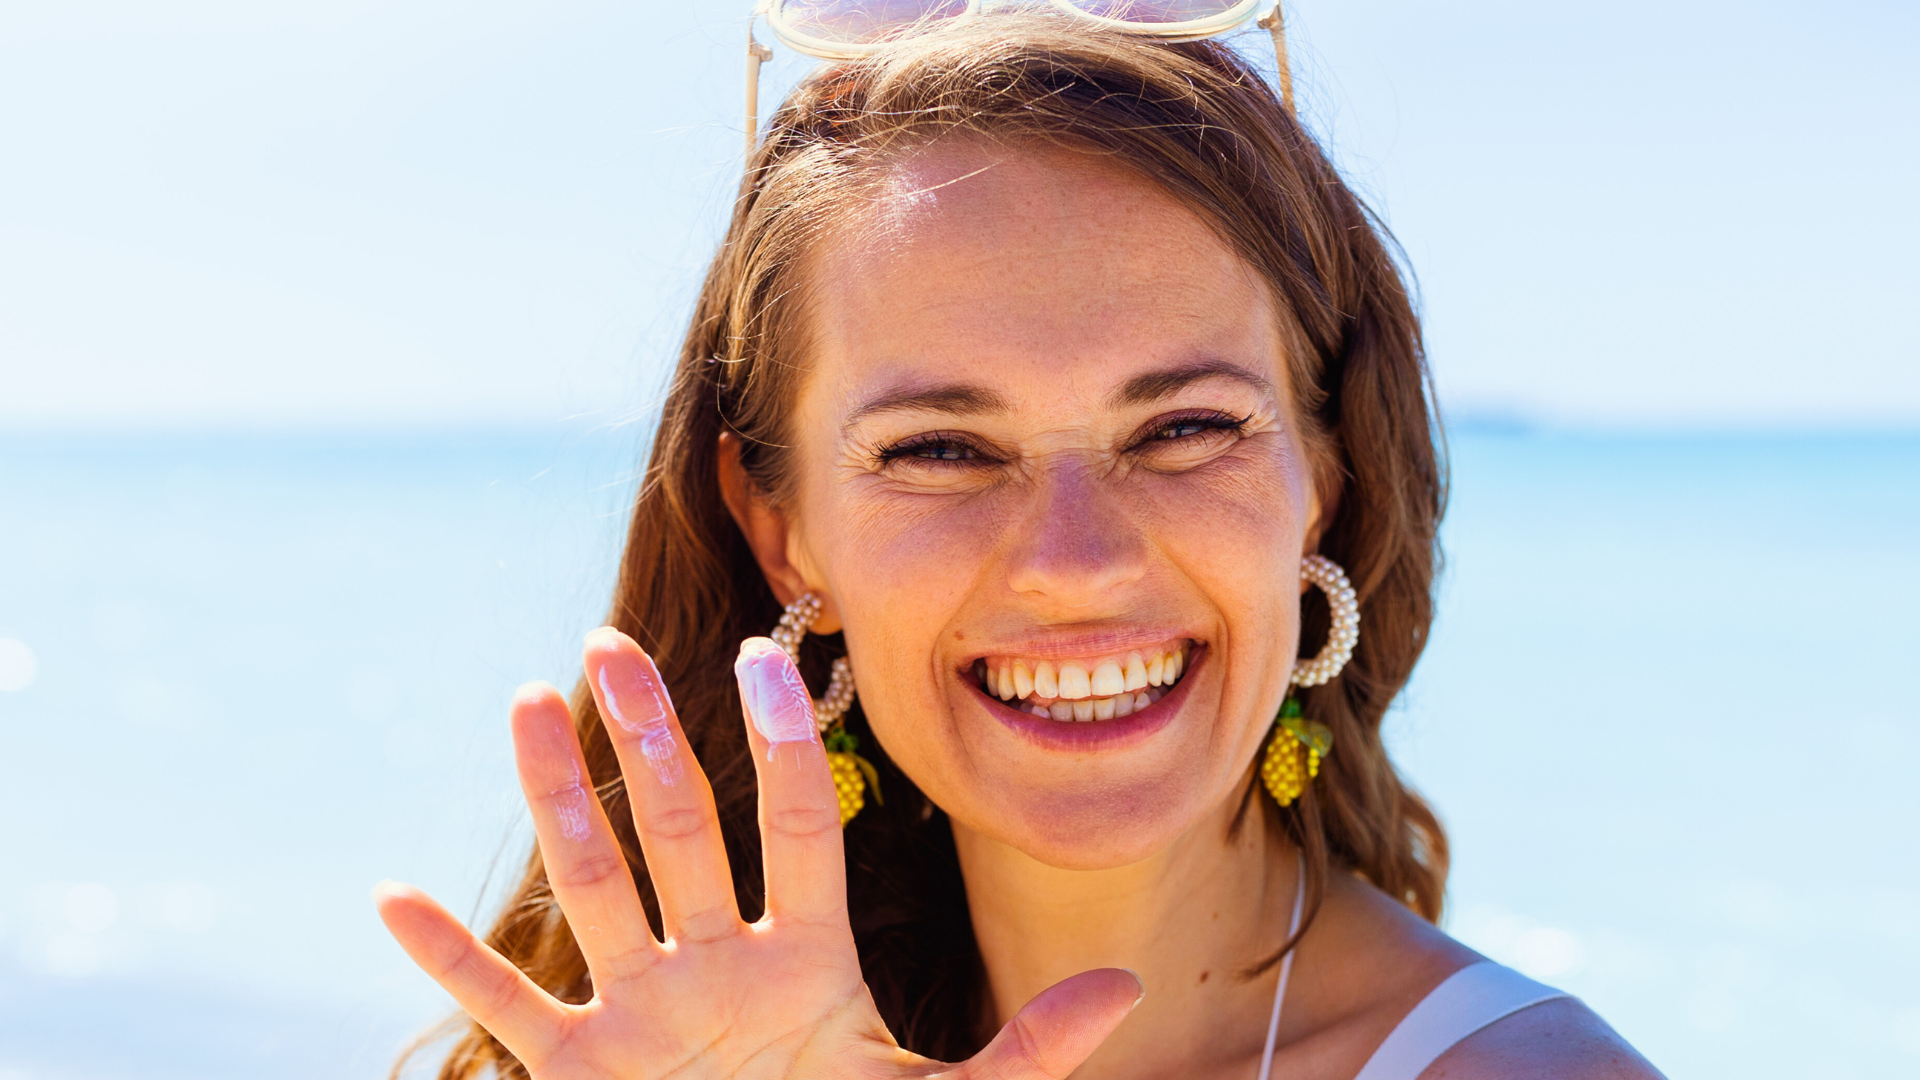 What Is The “Two-Finger Sunscreen Method” & Does It Work?